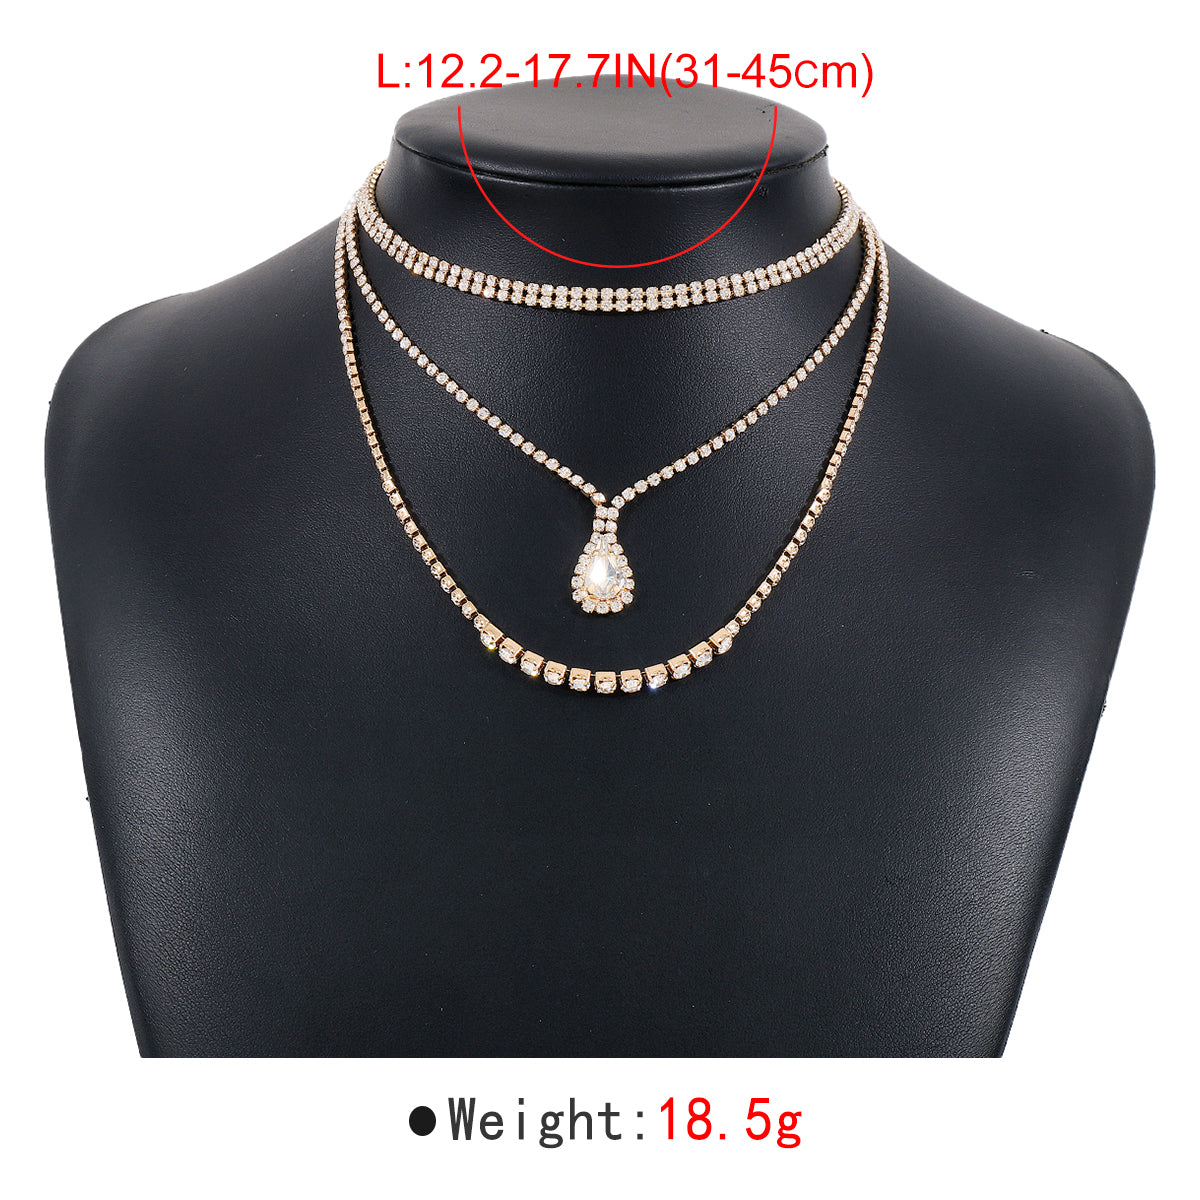 N11388 Luxury Claw Chain Crystals Pendant Necklace